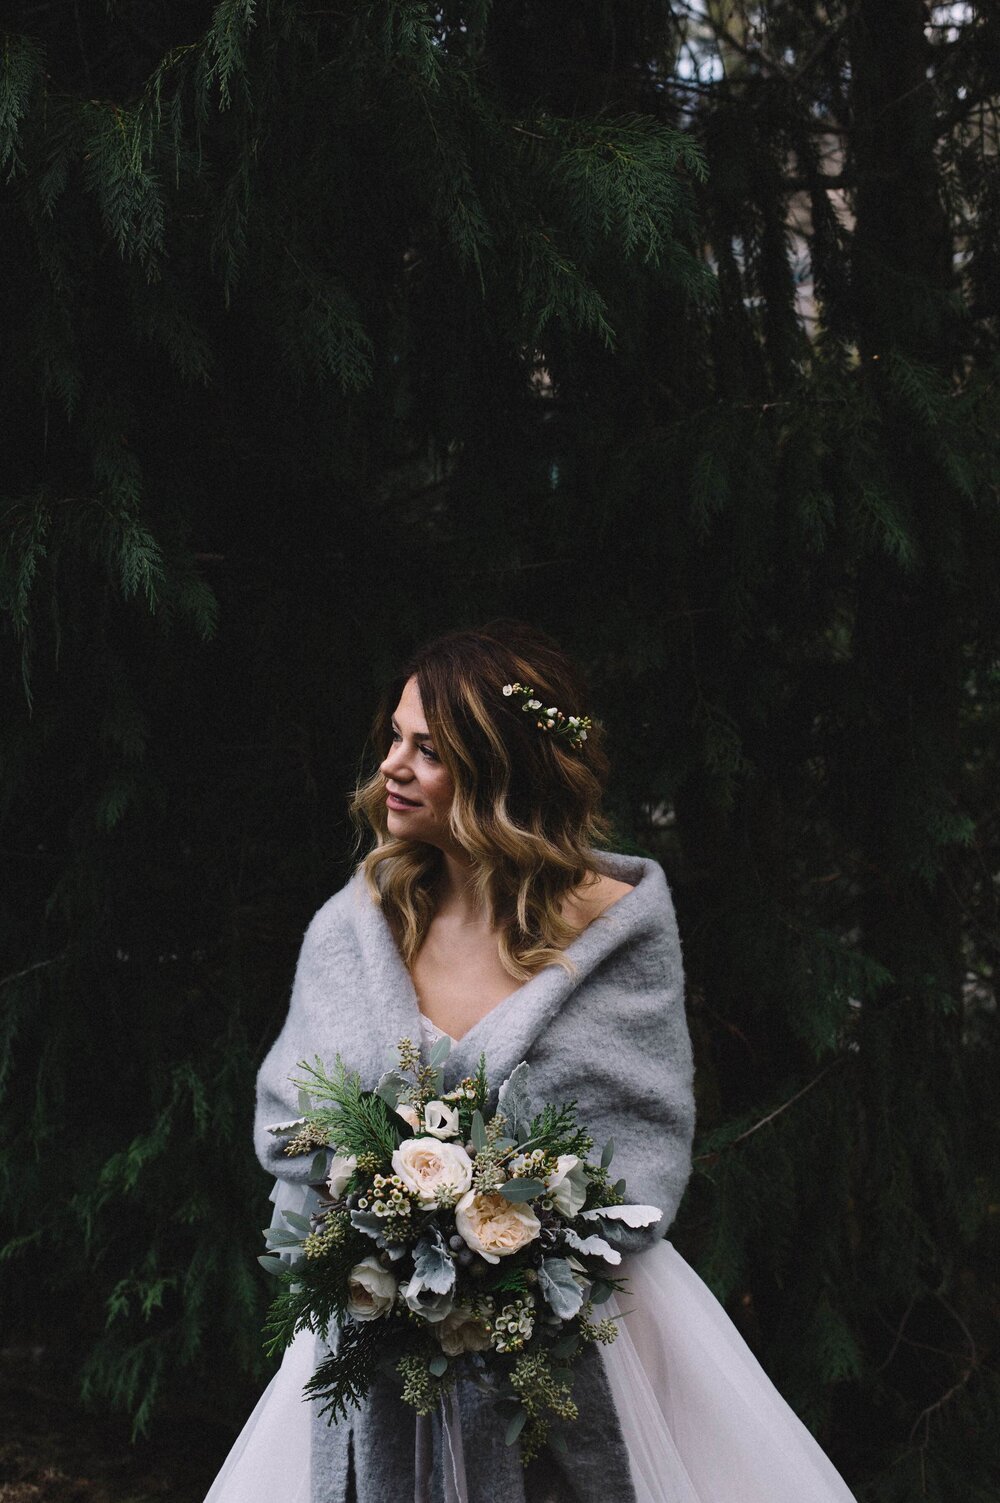 How to Style A Warm Bridal Look For Winter